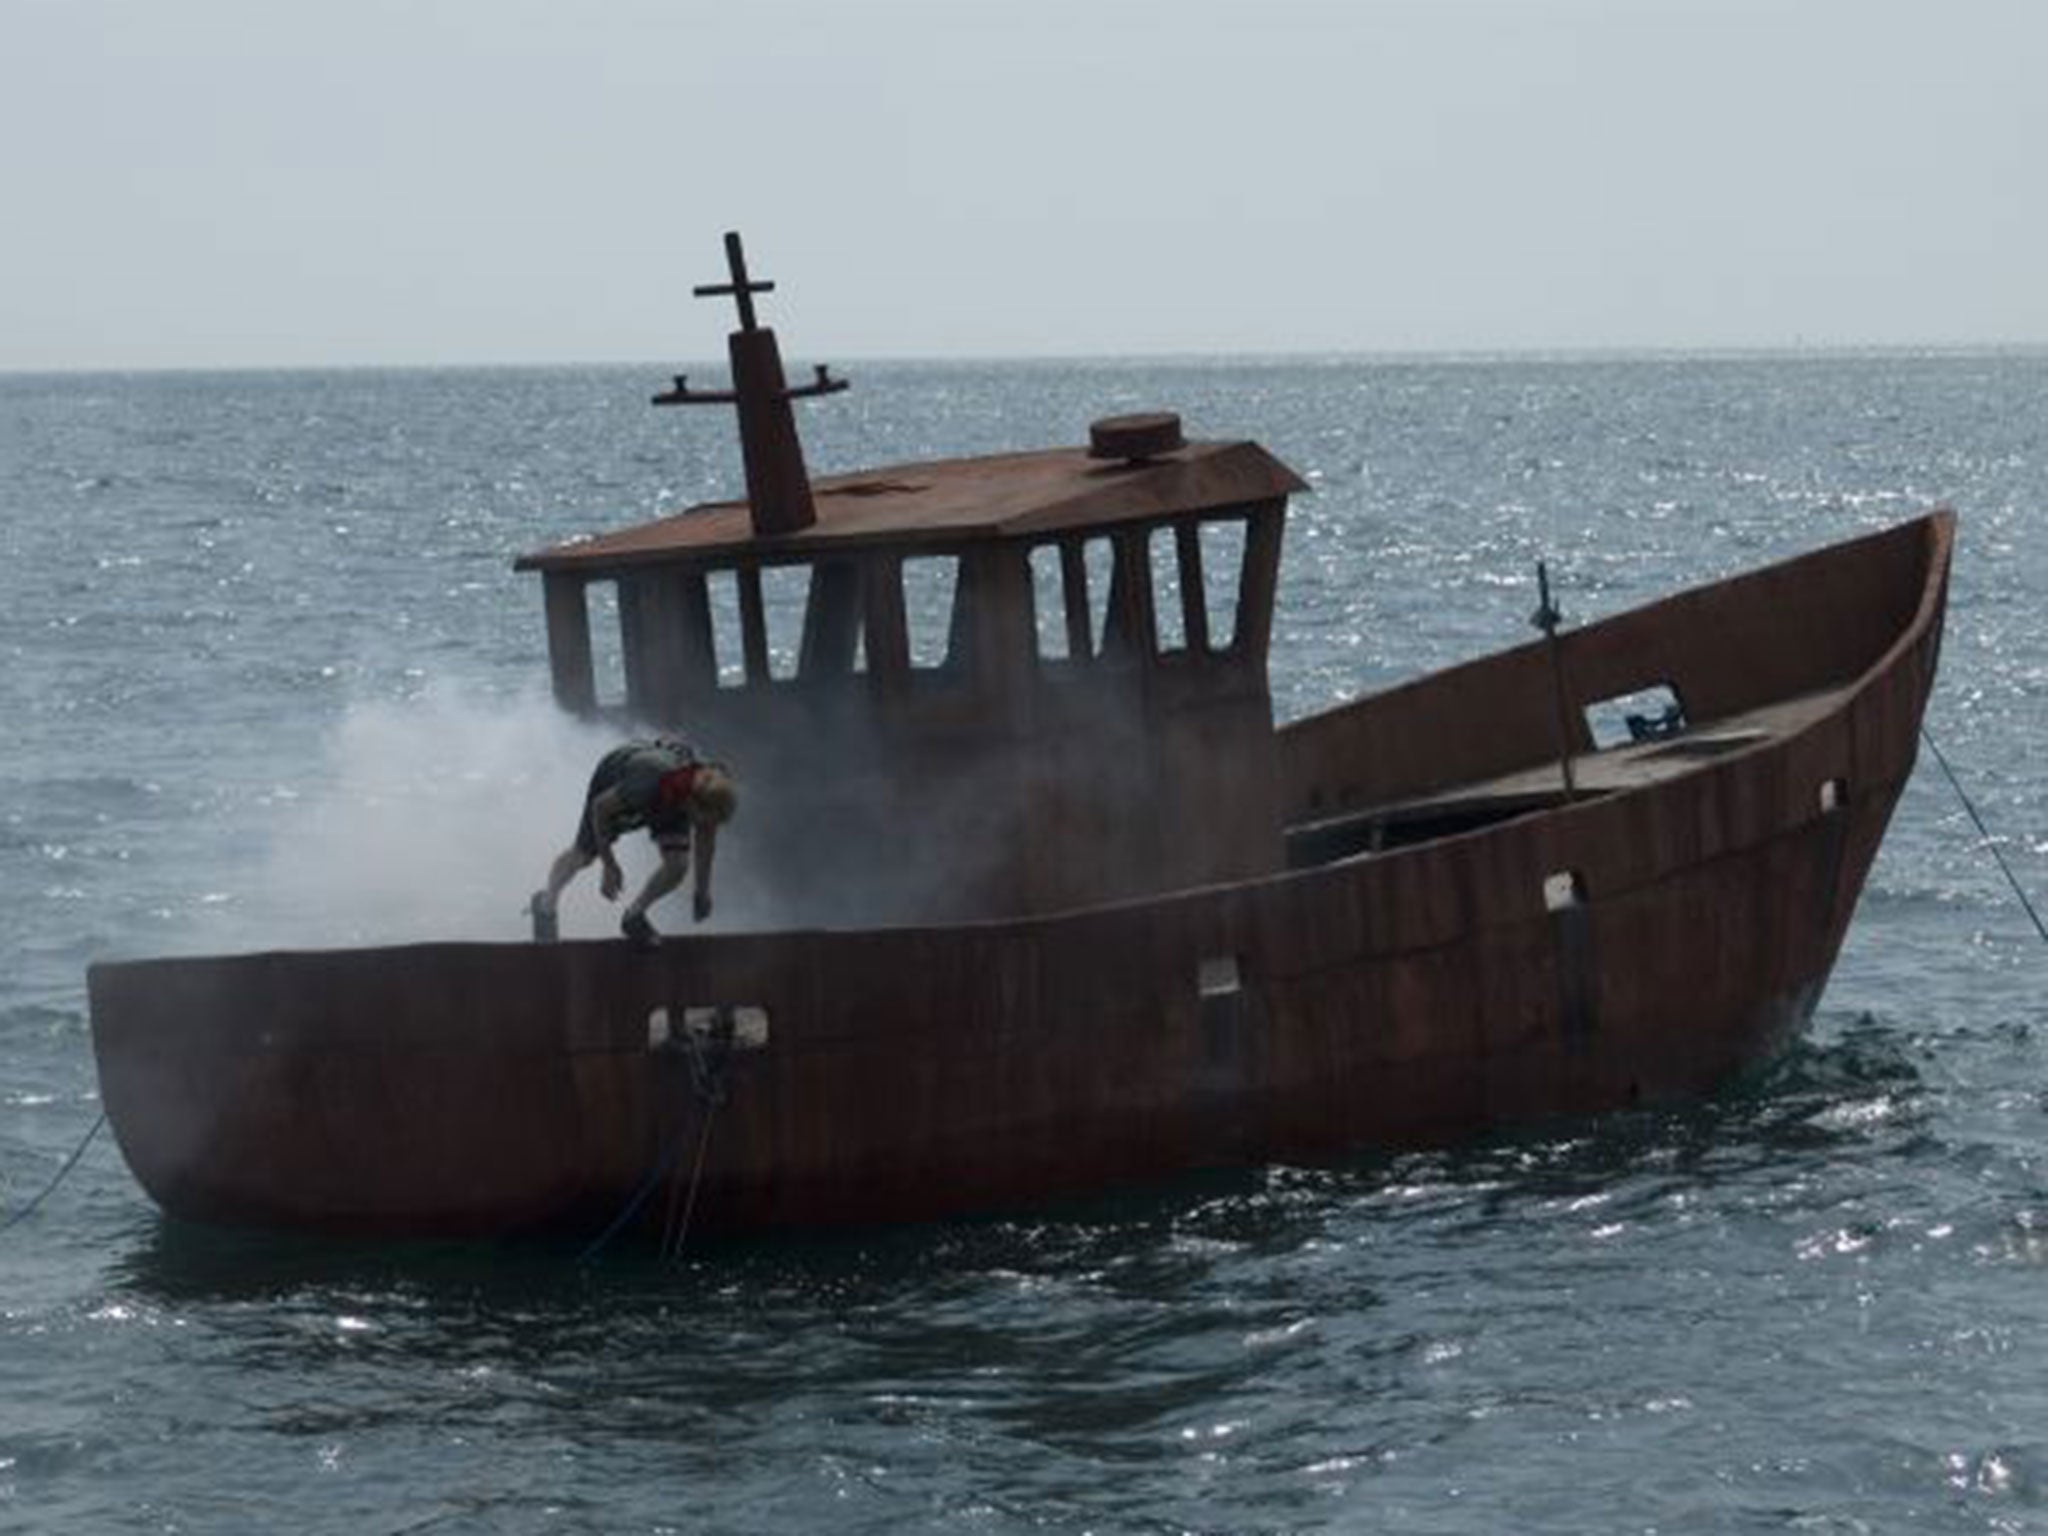 Artist Simon Faithfull sets fire to and sinks boat off Dorset for coral reef project The Independent The Independent pic